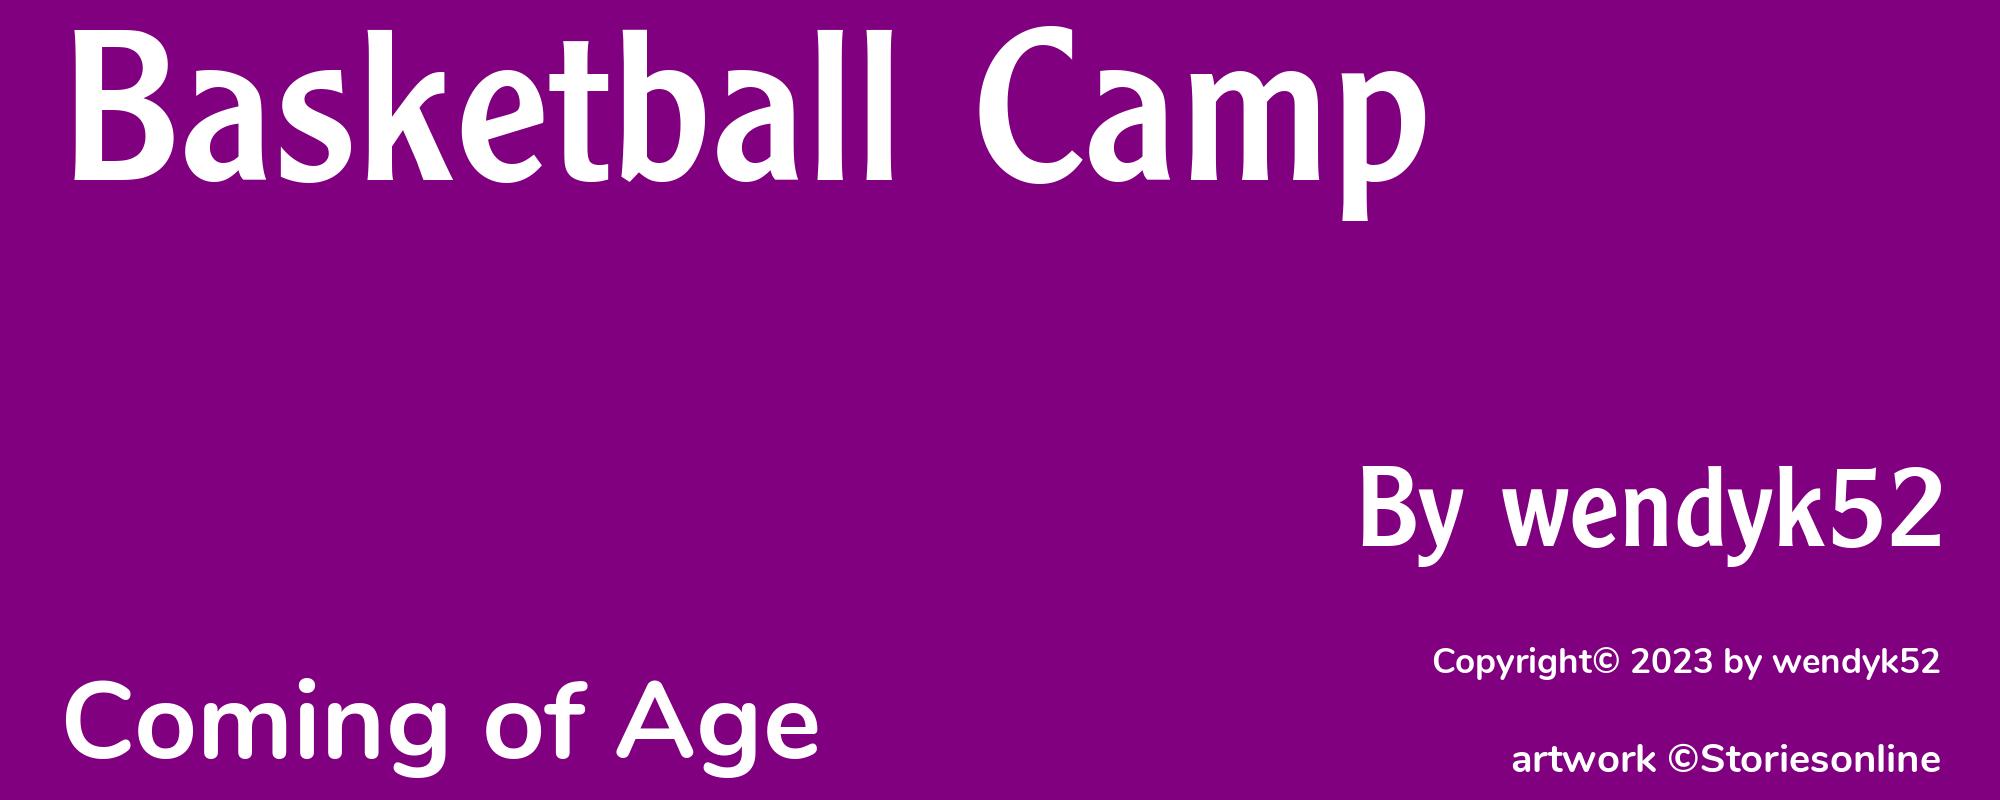 Basketball Camp - Cover